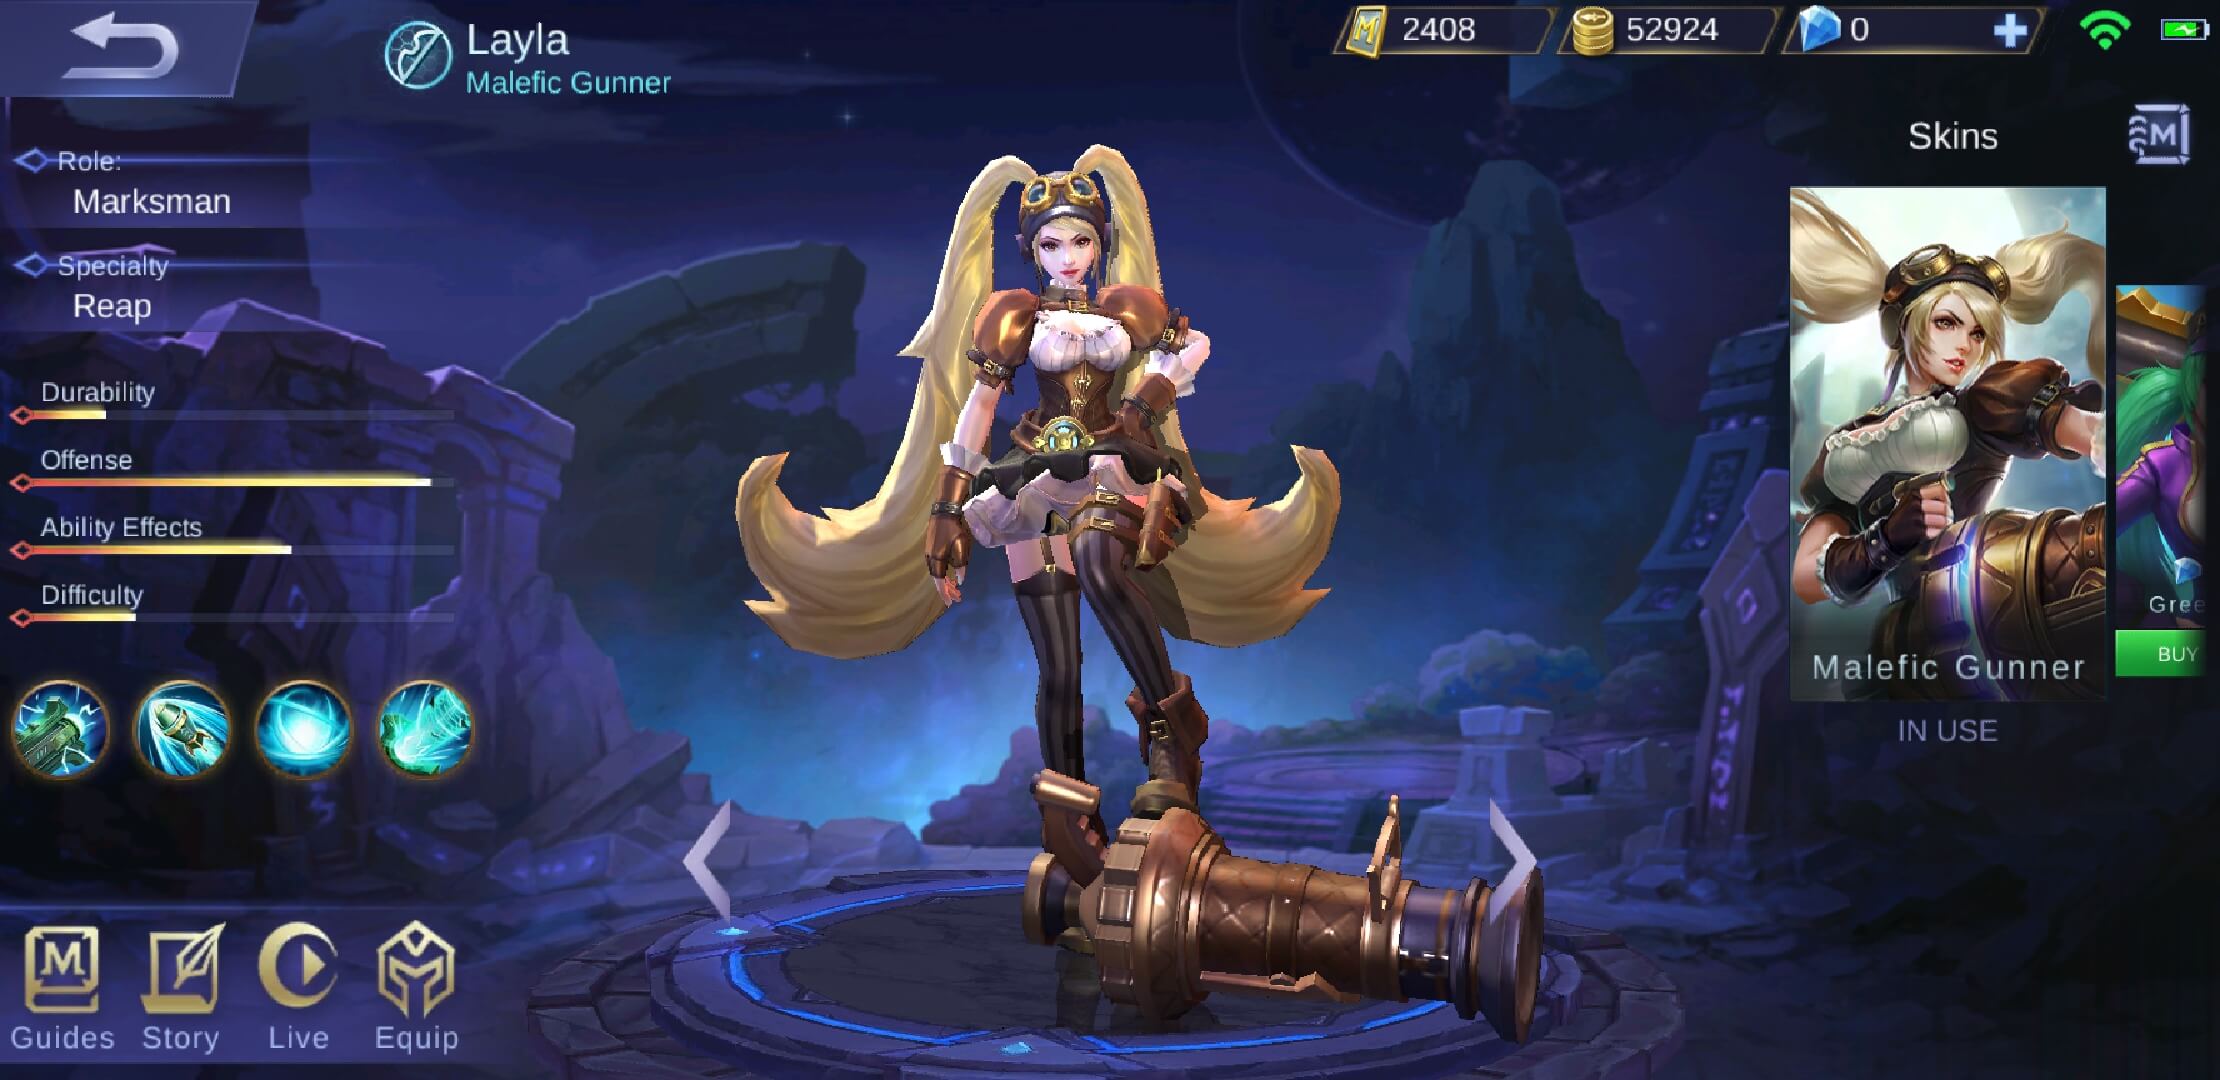 Mobile Legends Layla Hero Guide Skills Builds Skins Gear 2220x1080